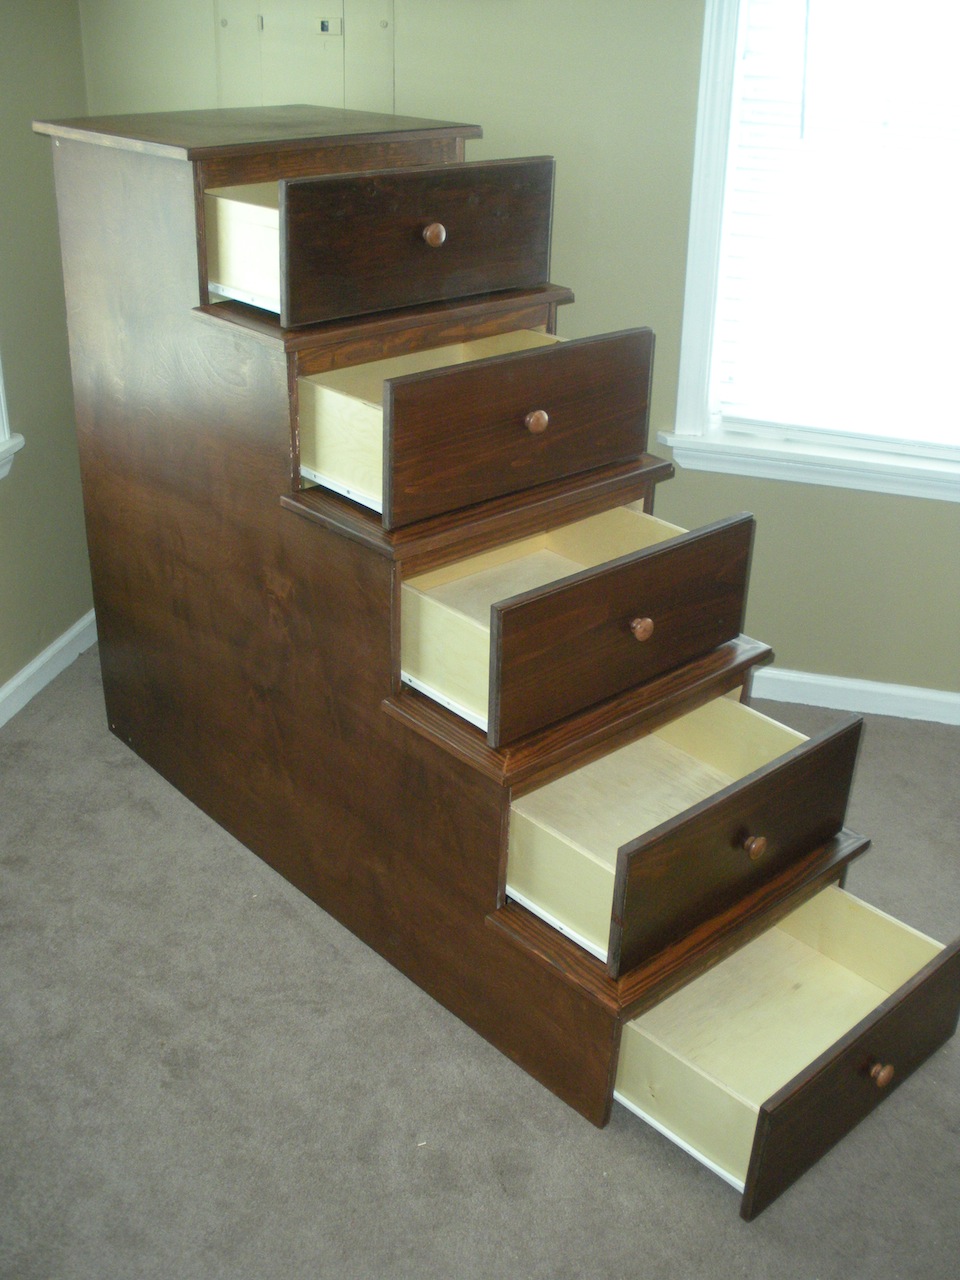 Richard S Bunk Bed Storage The Wood, How To Build A Bunk Bed With Stairs